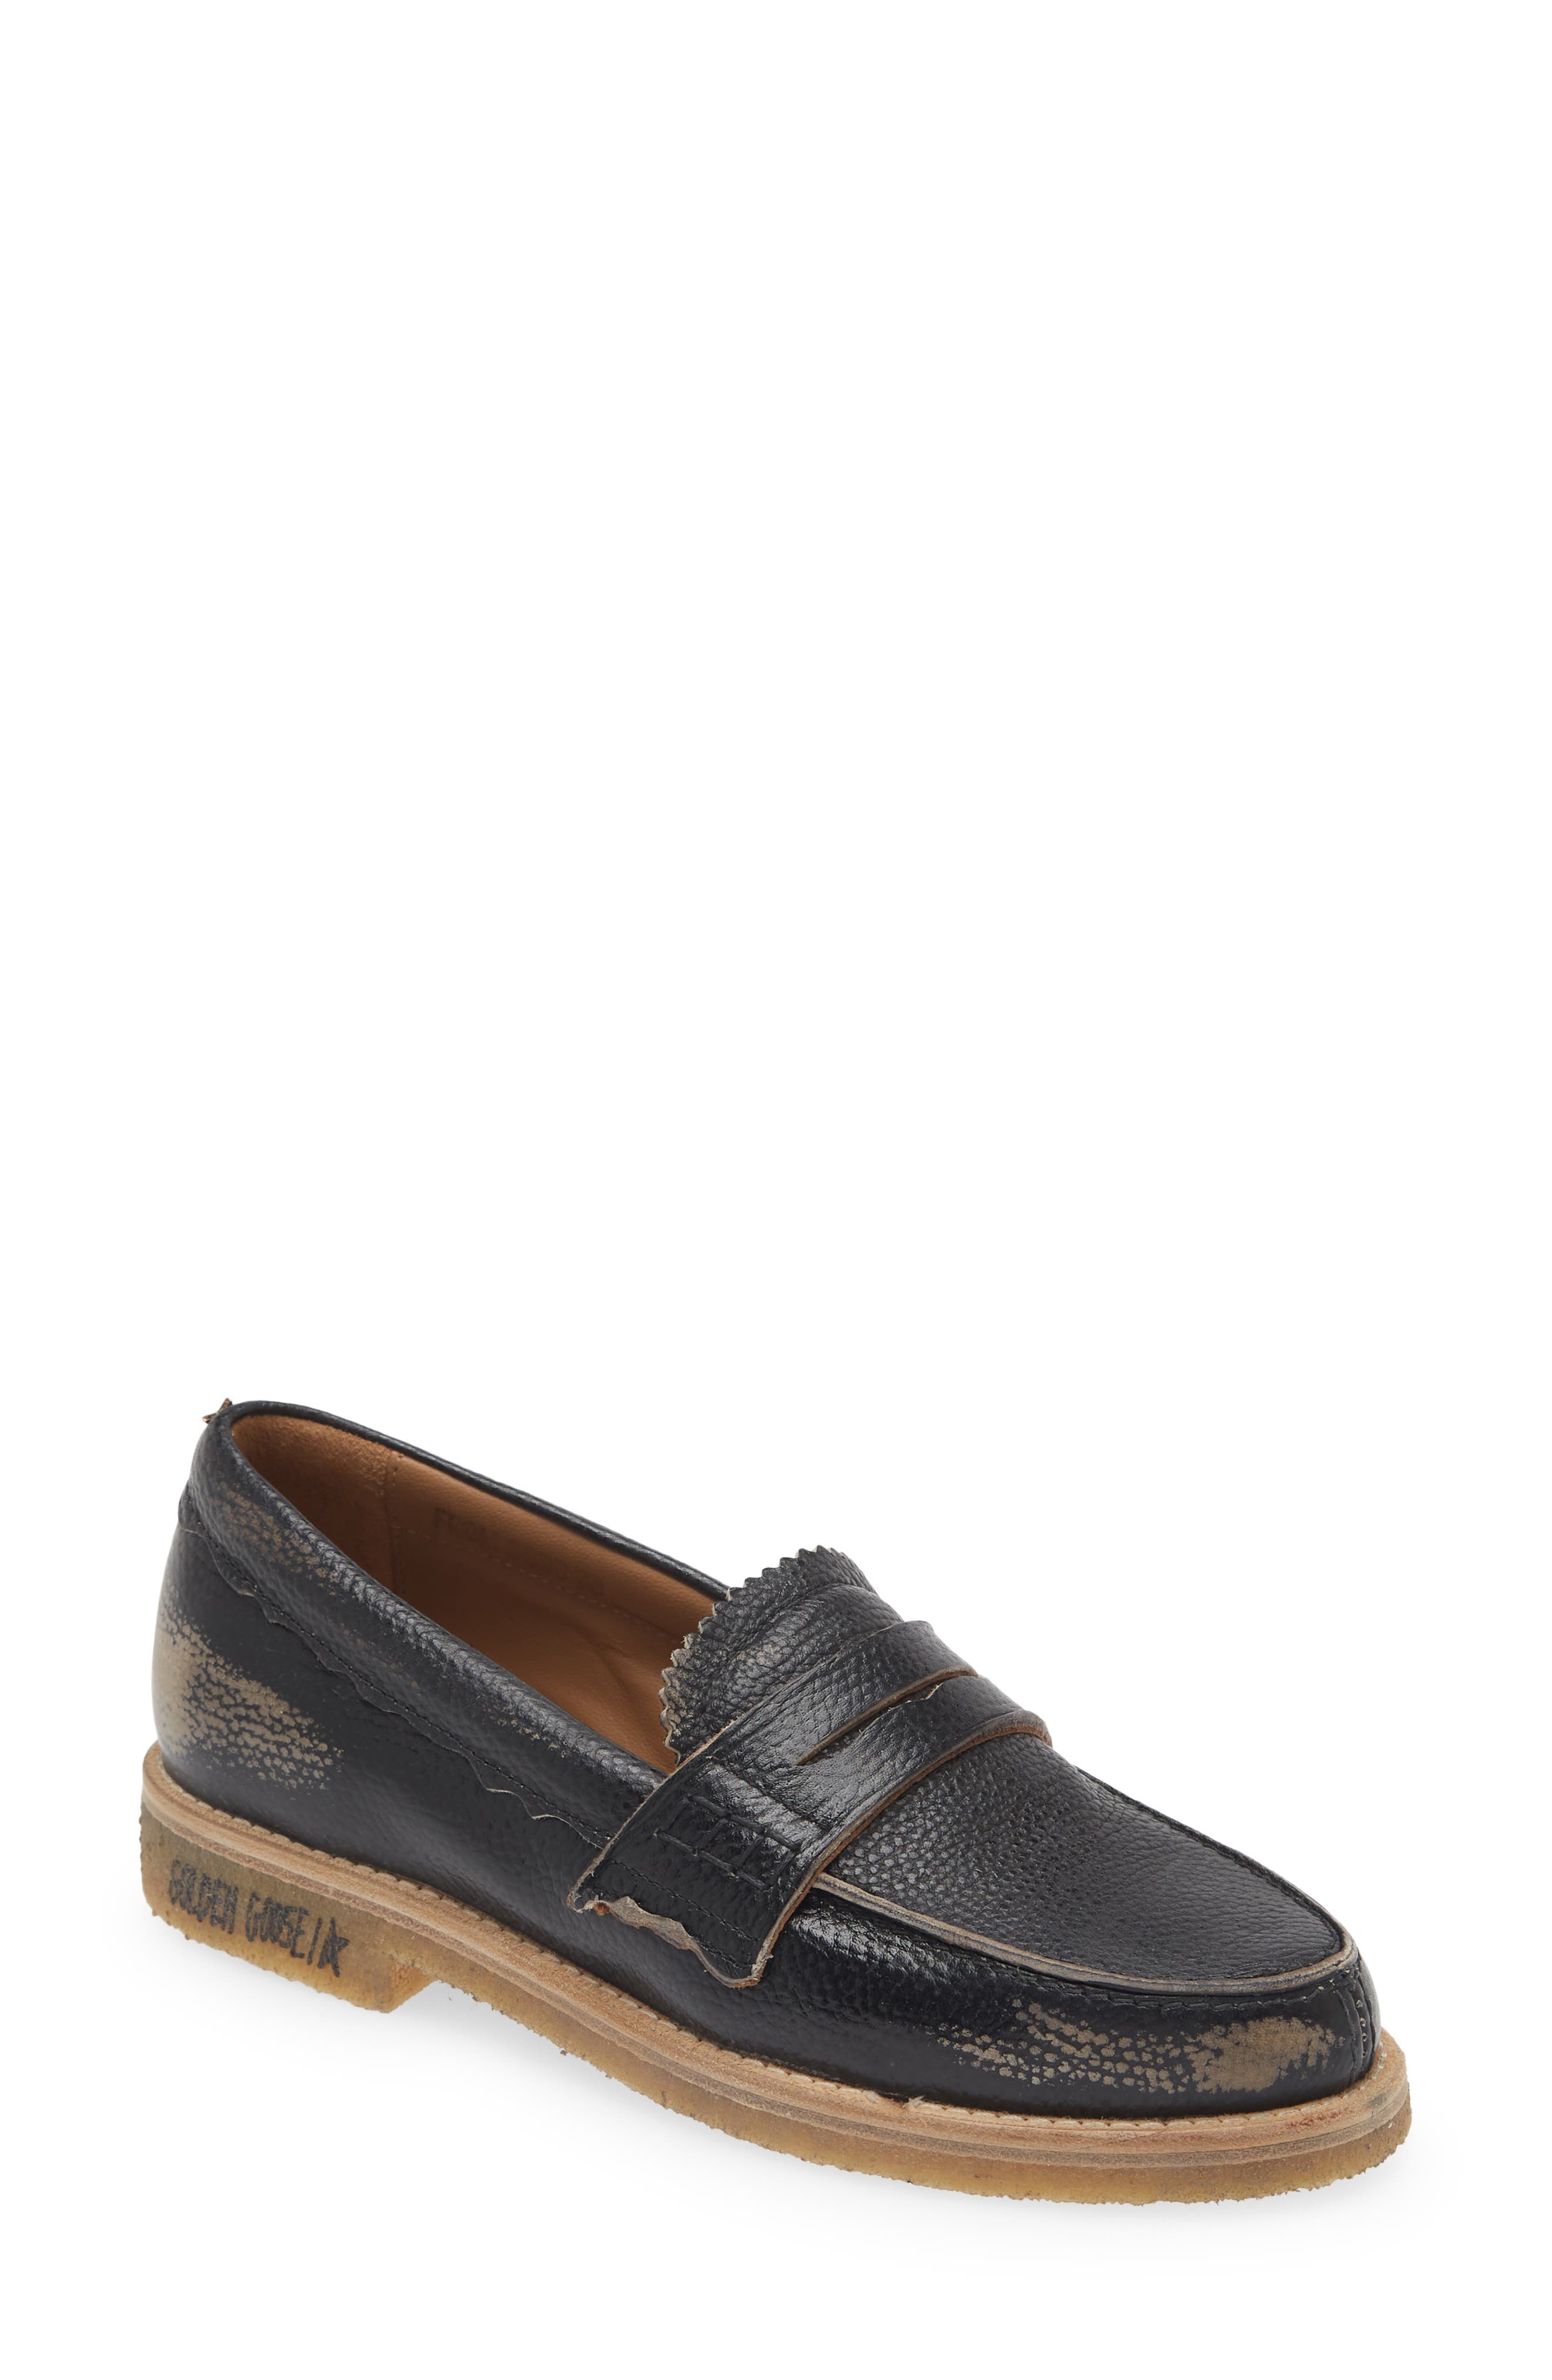 Grained leather penny loafers